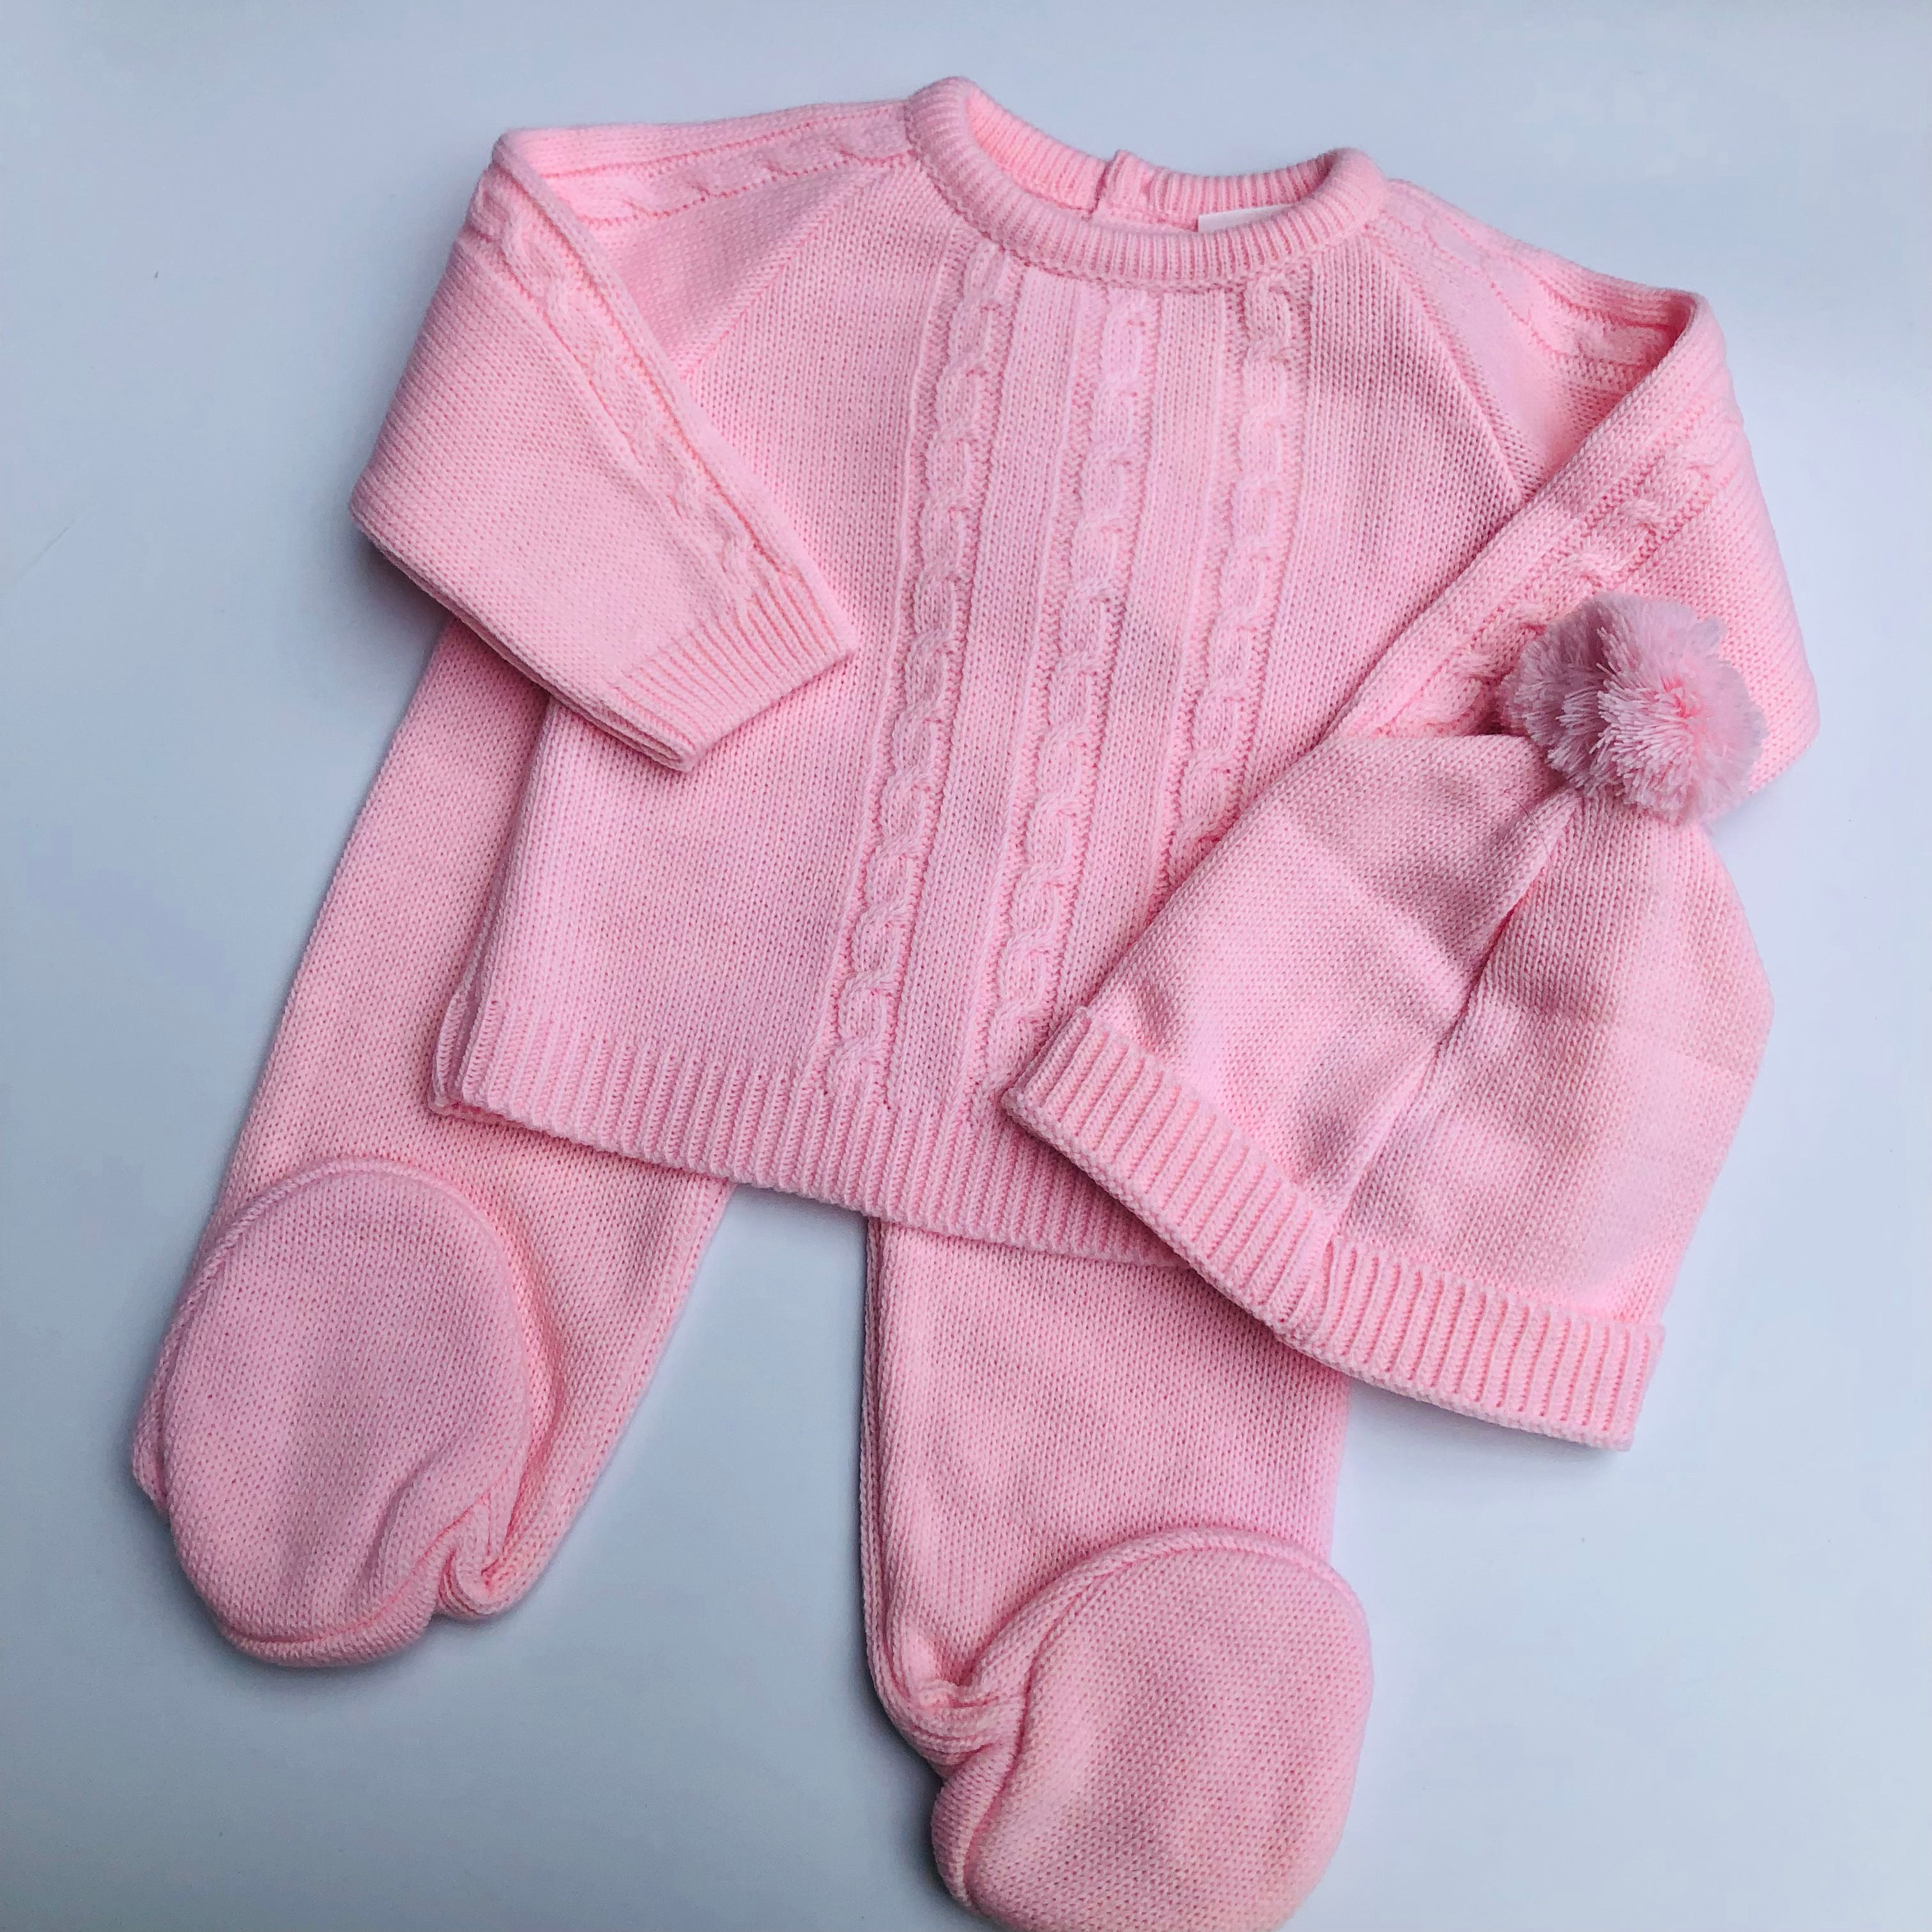 Pink 3 piece cable knit detail sets - 3940